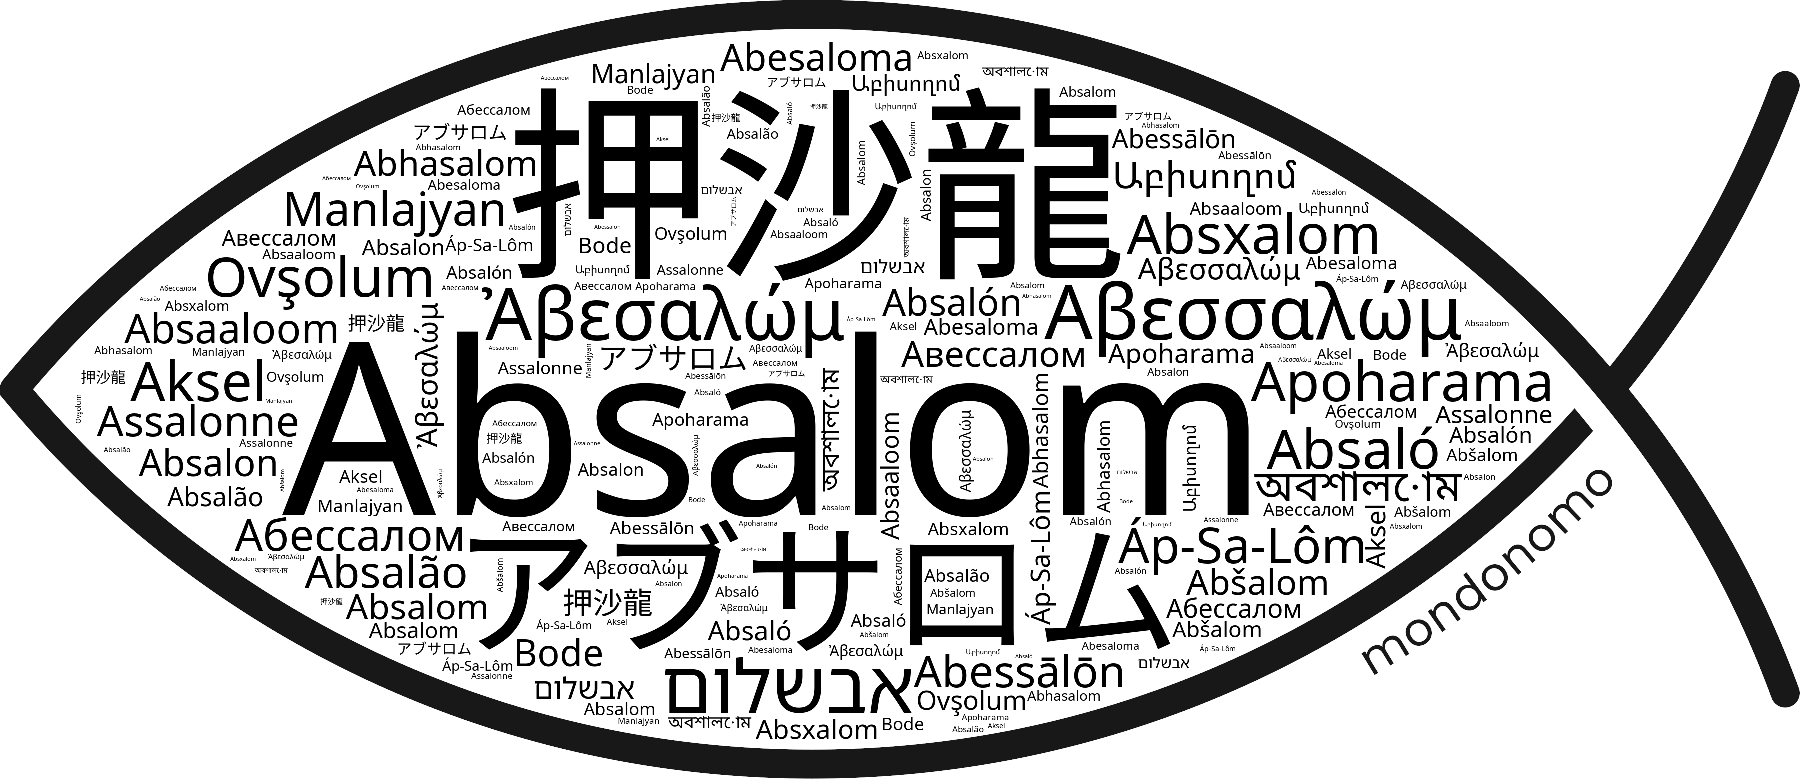 Name Absalom in the world's Bibles